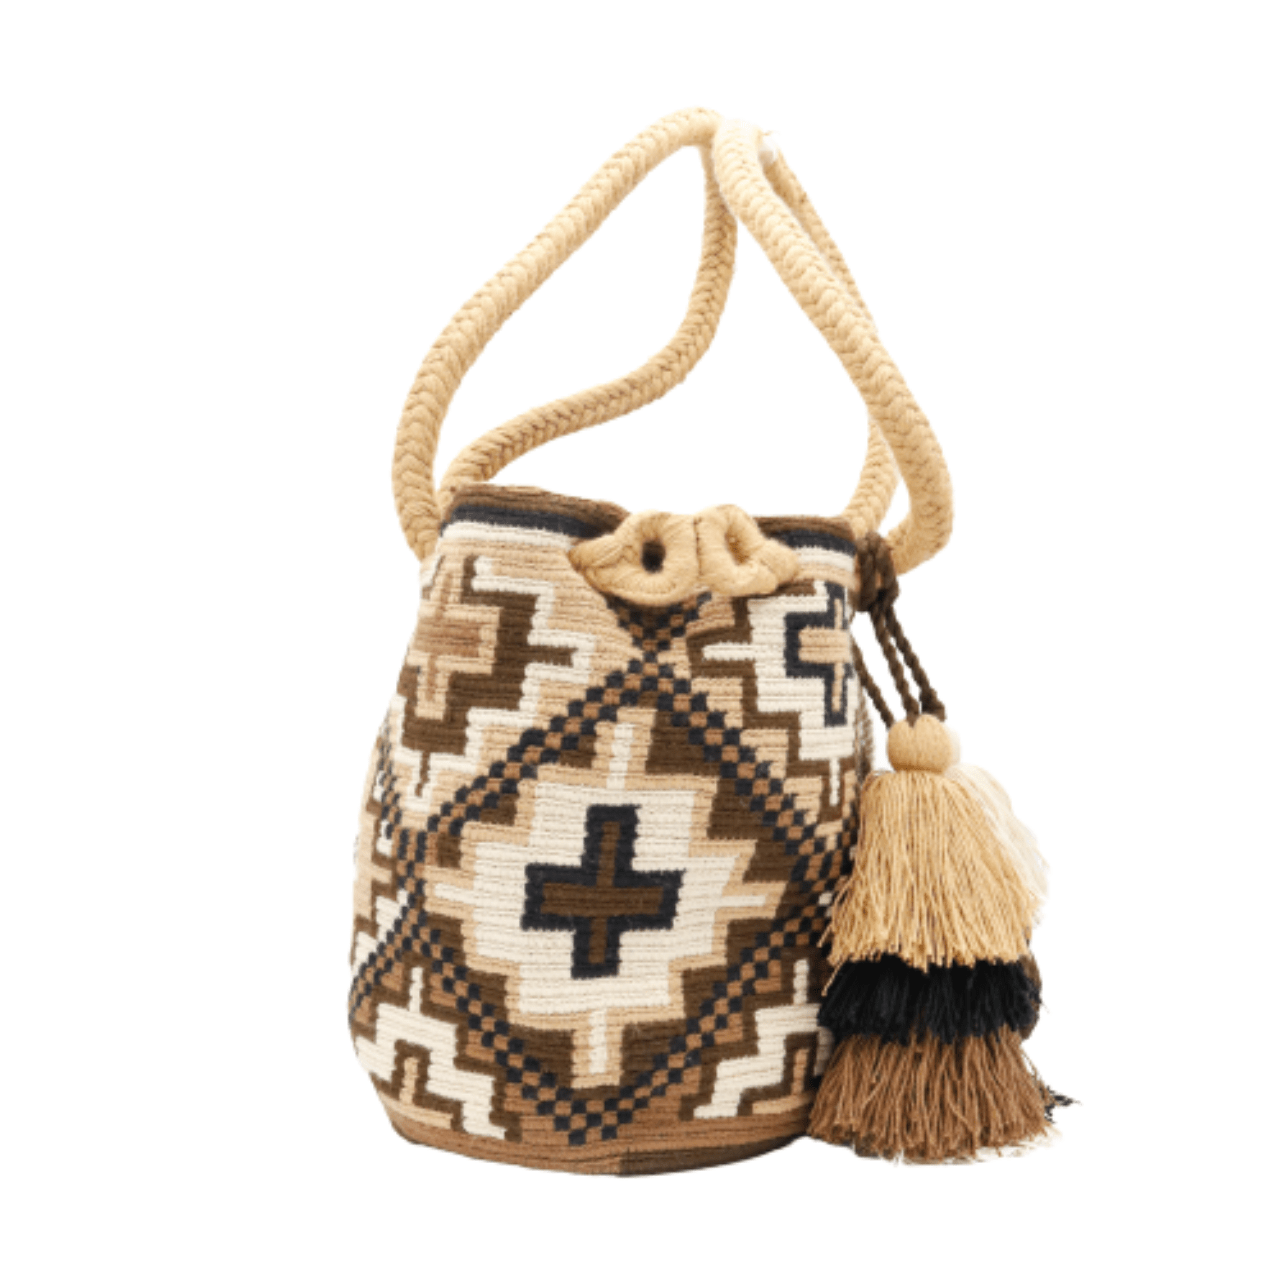 Saskia Crochet Tote Bag - Large Size, Beige and Brown Shades, 2 Braided Handles with Tassels and Pom Poms Decorations.